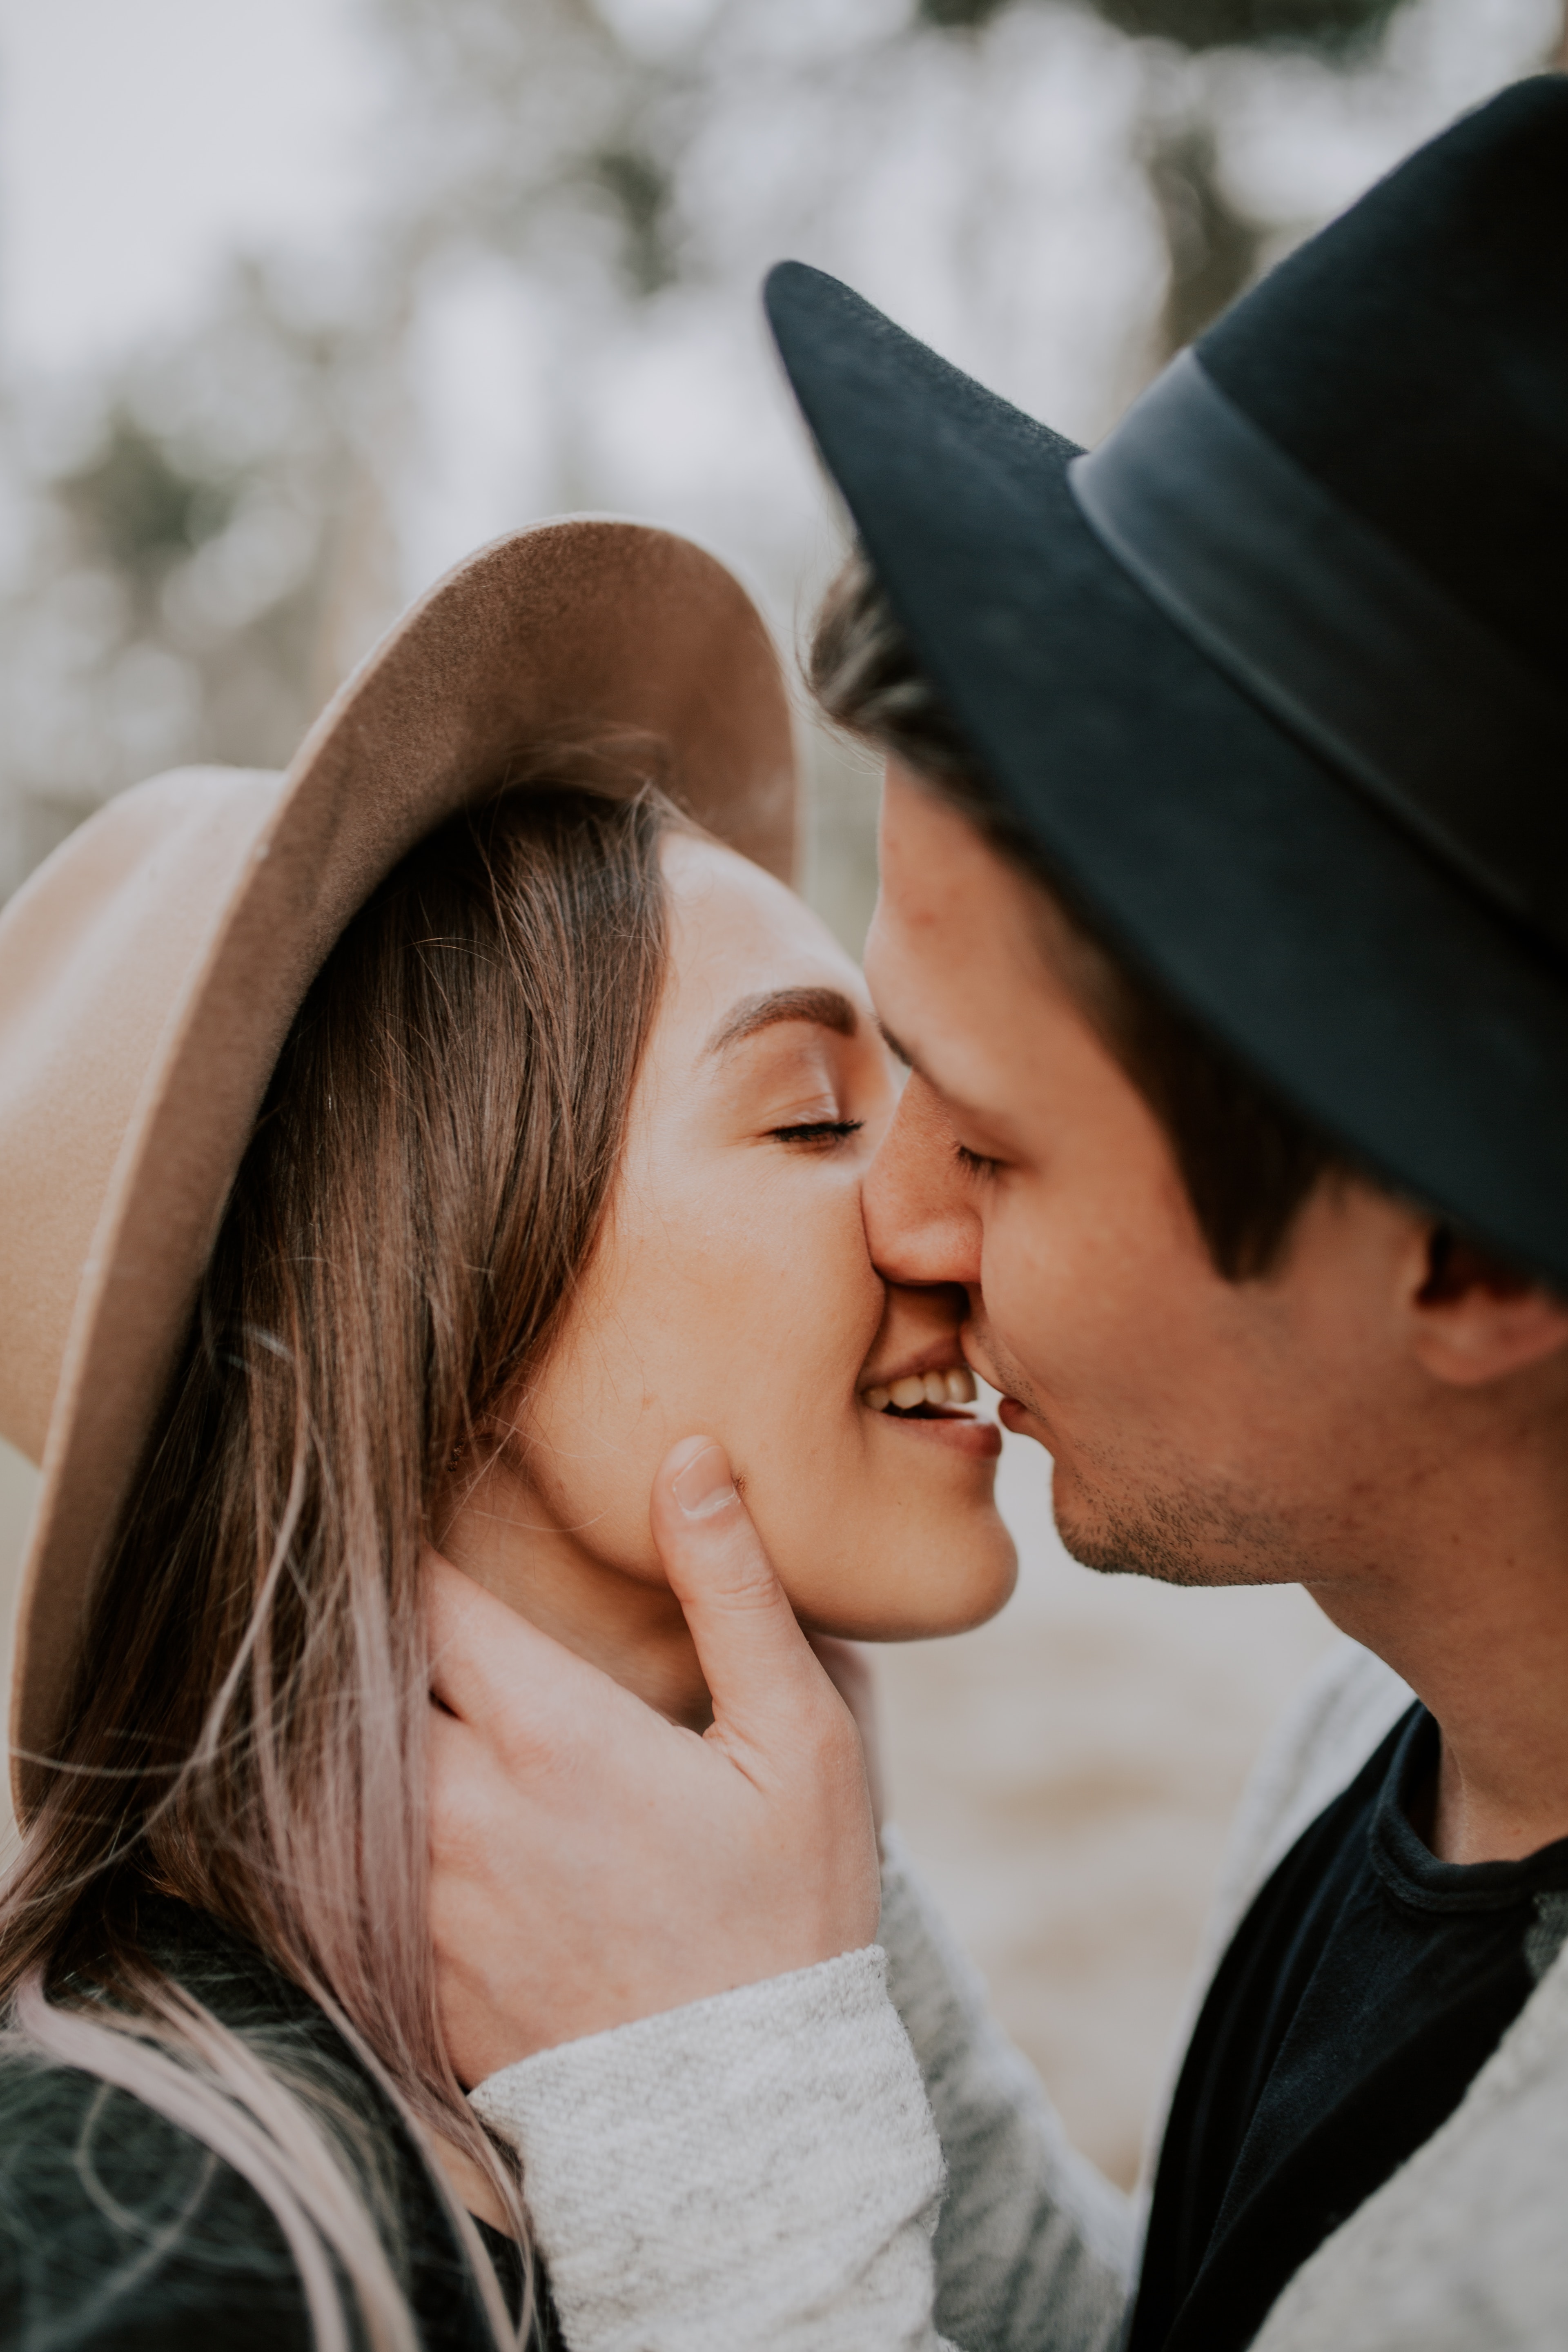 A photo of a couple kissing while smiling  | Source: Unsplash